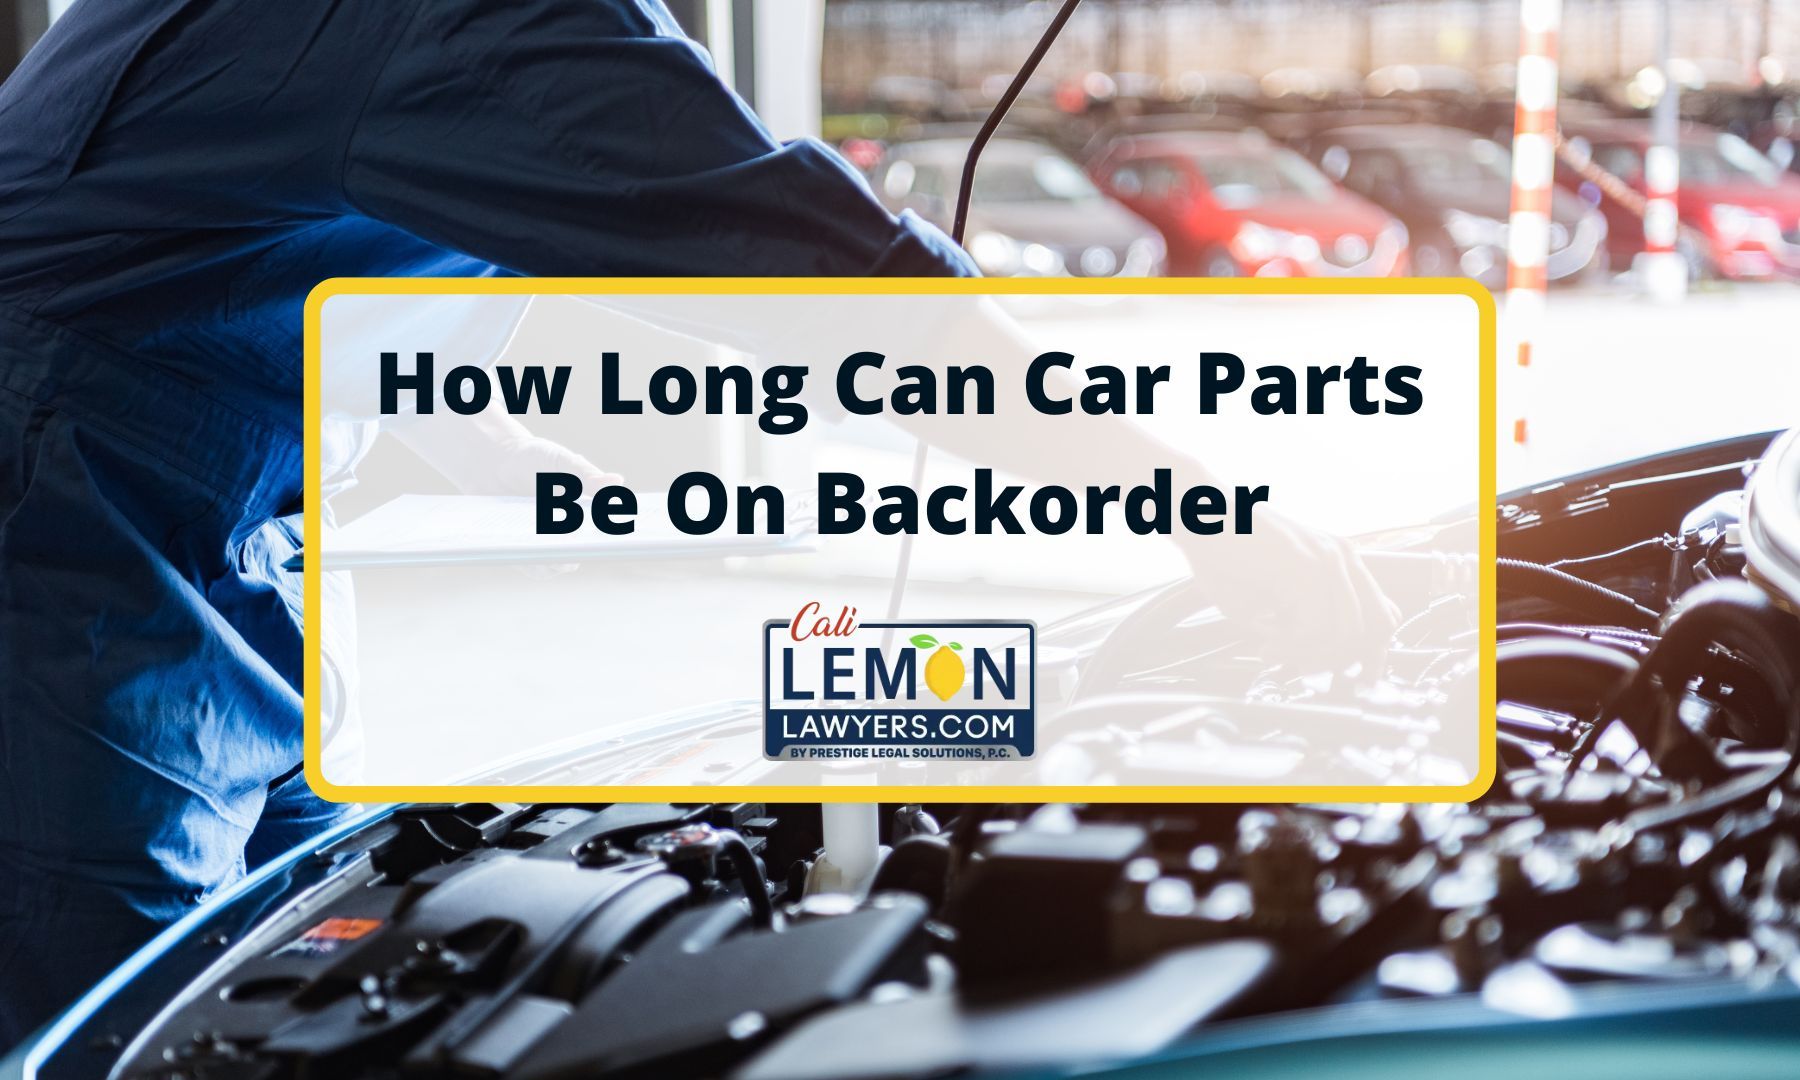 How Long Can Car Parts Be On Backorder